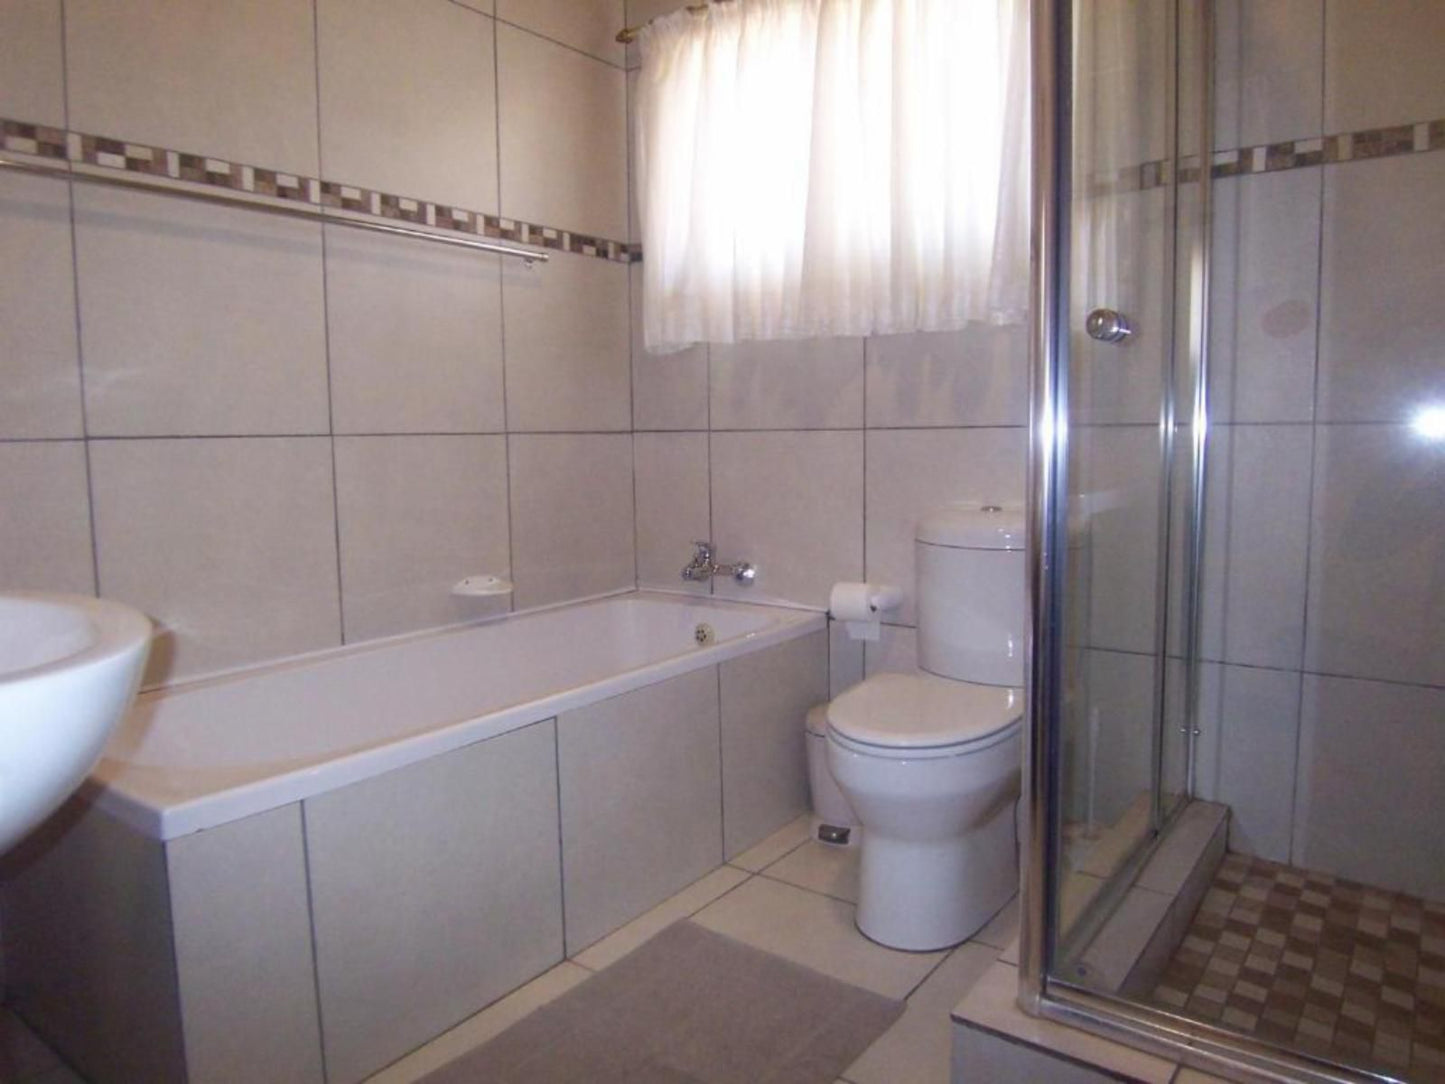 Hadida Guest House Kimberley Northern Cape South Africa Unsaturated, Bathroom